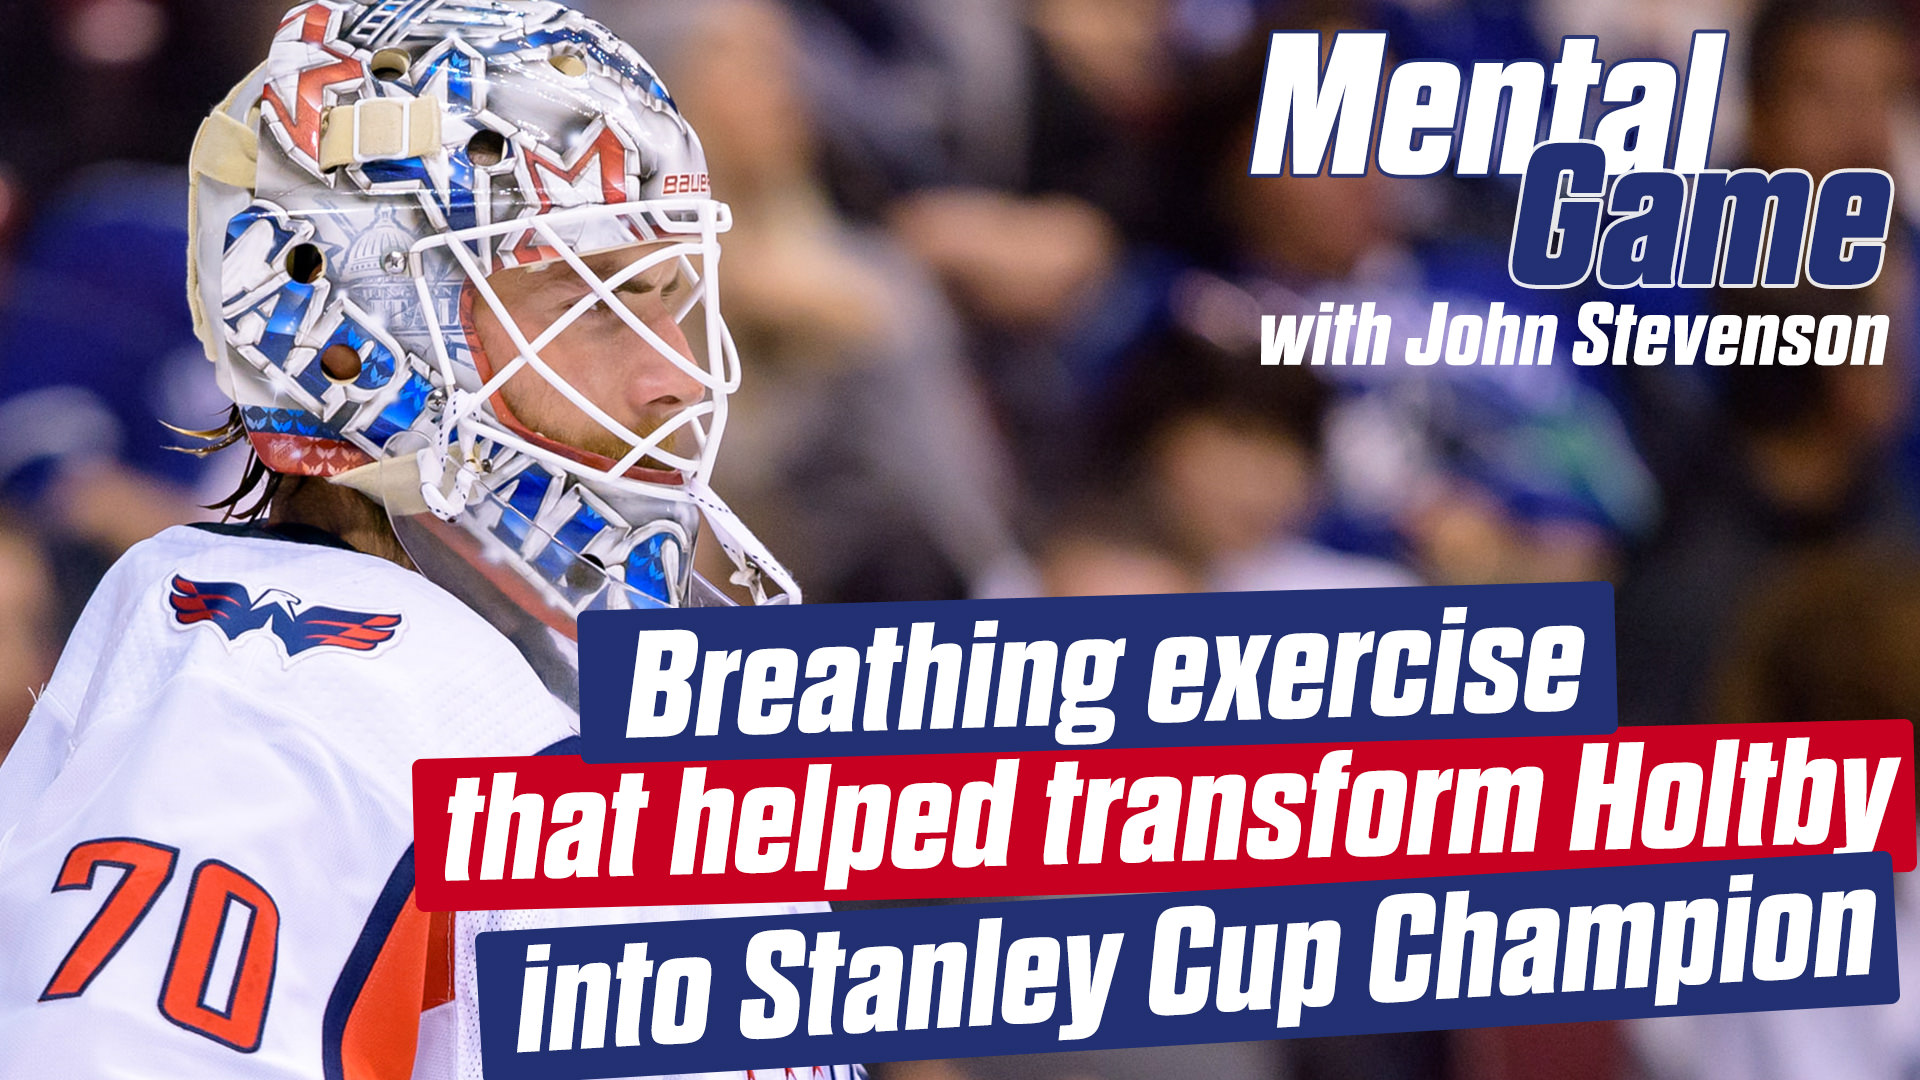 Breathing exercise that helped transform Holtby into Cup Champ